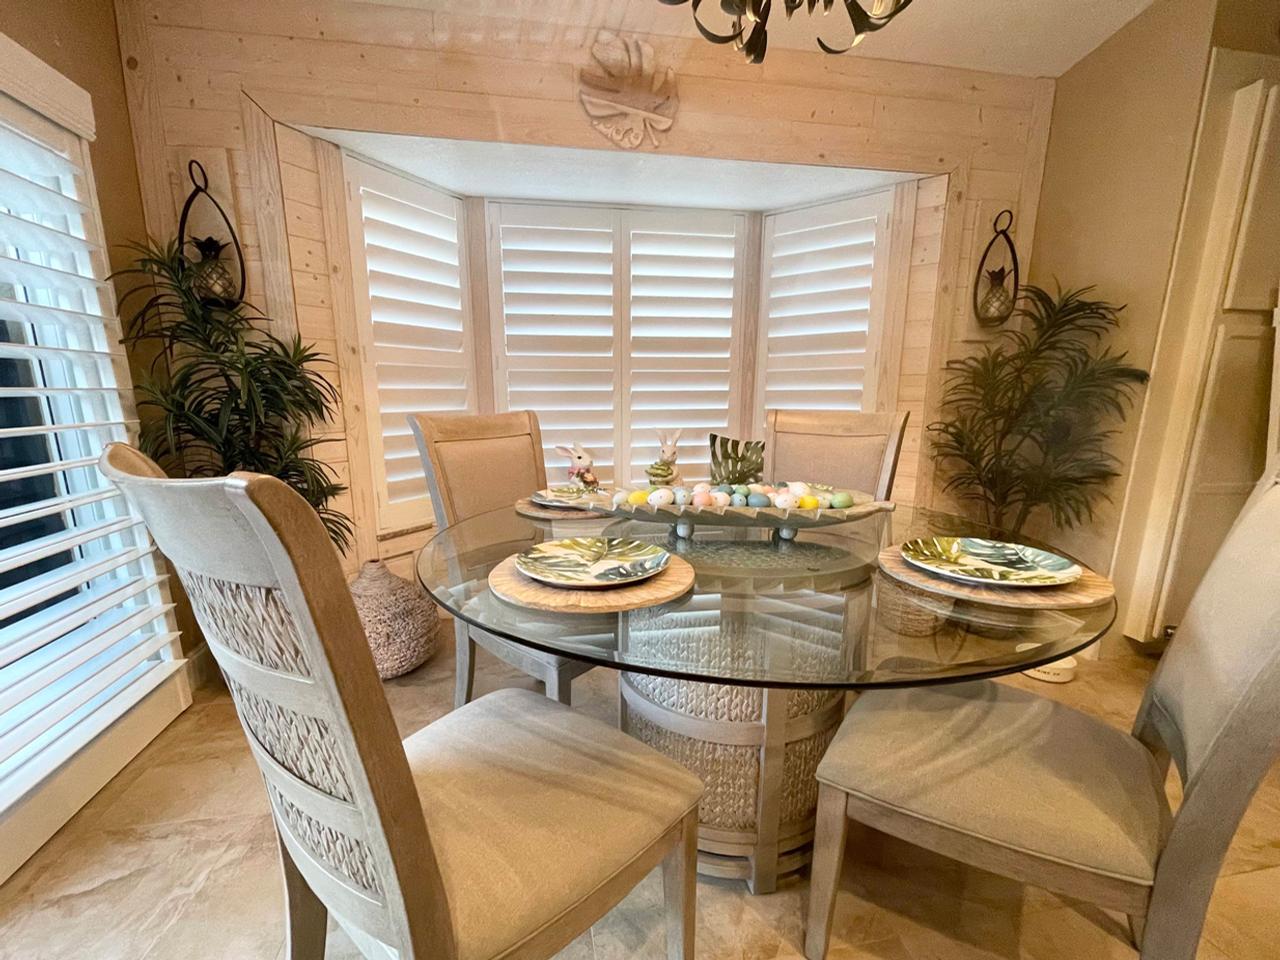 Bay window with shutters in dining room